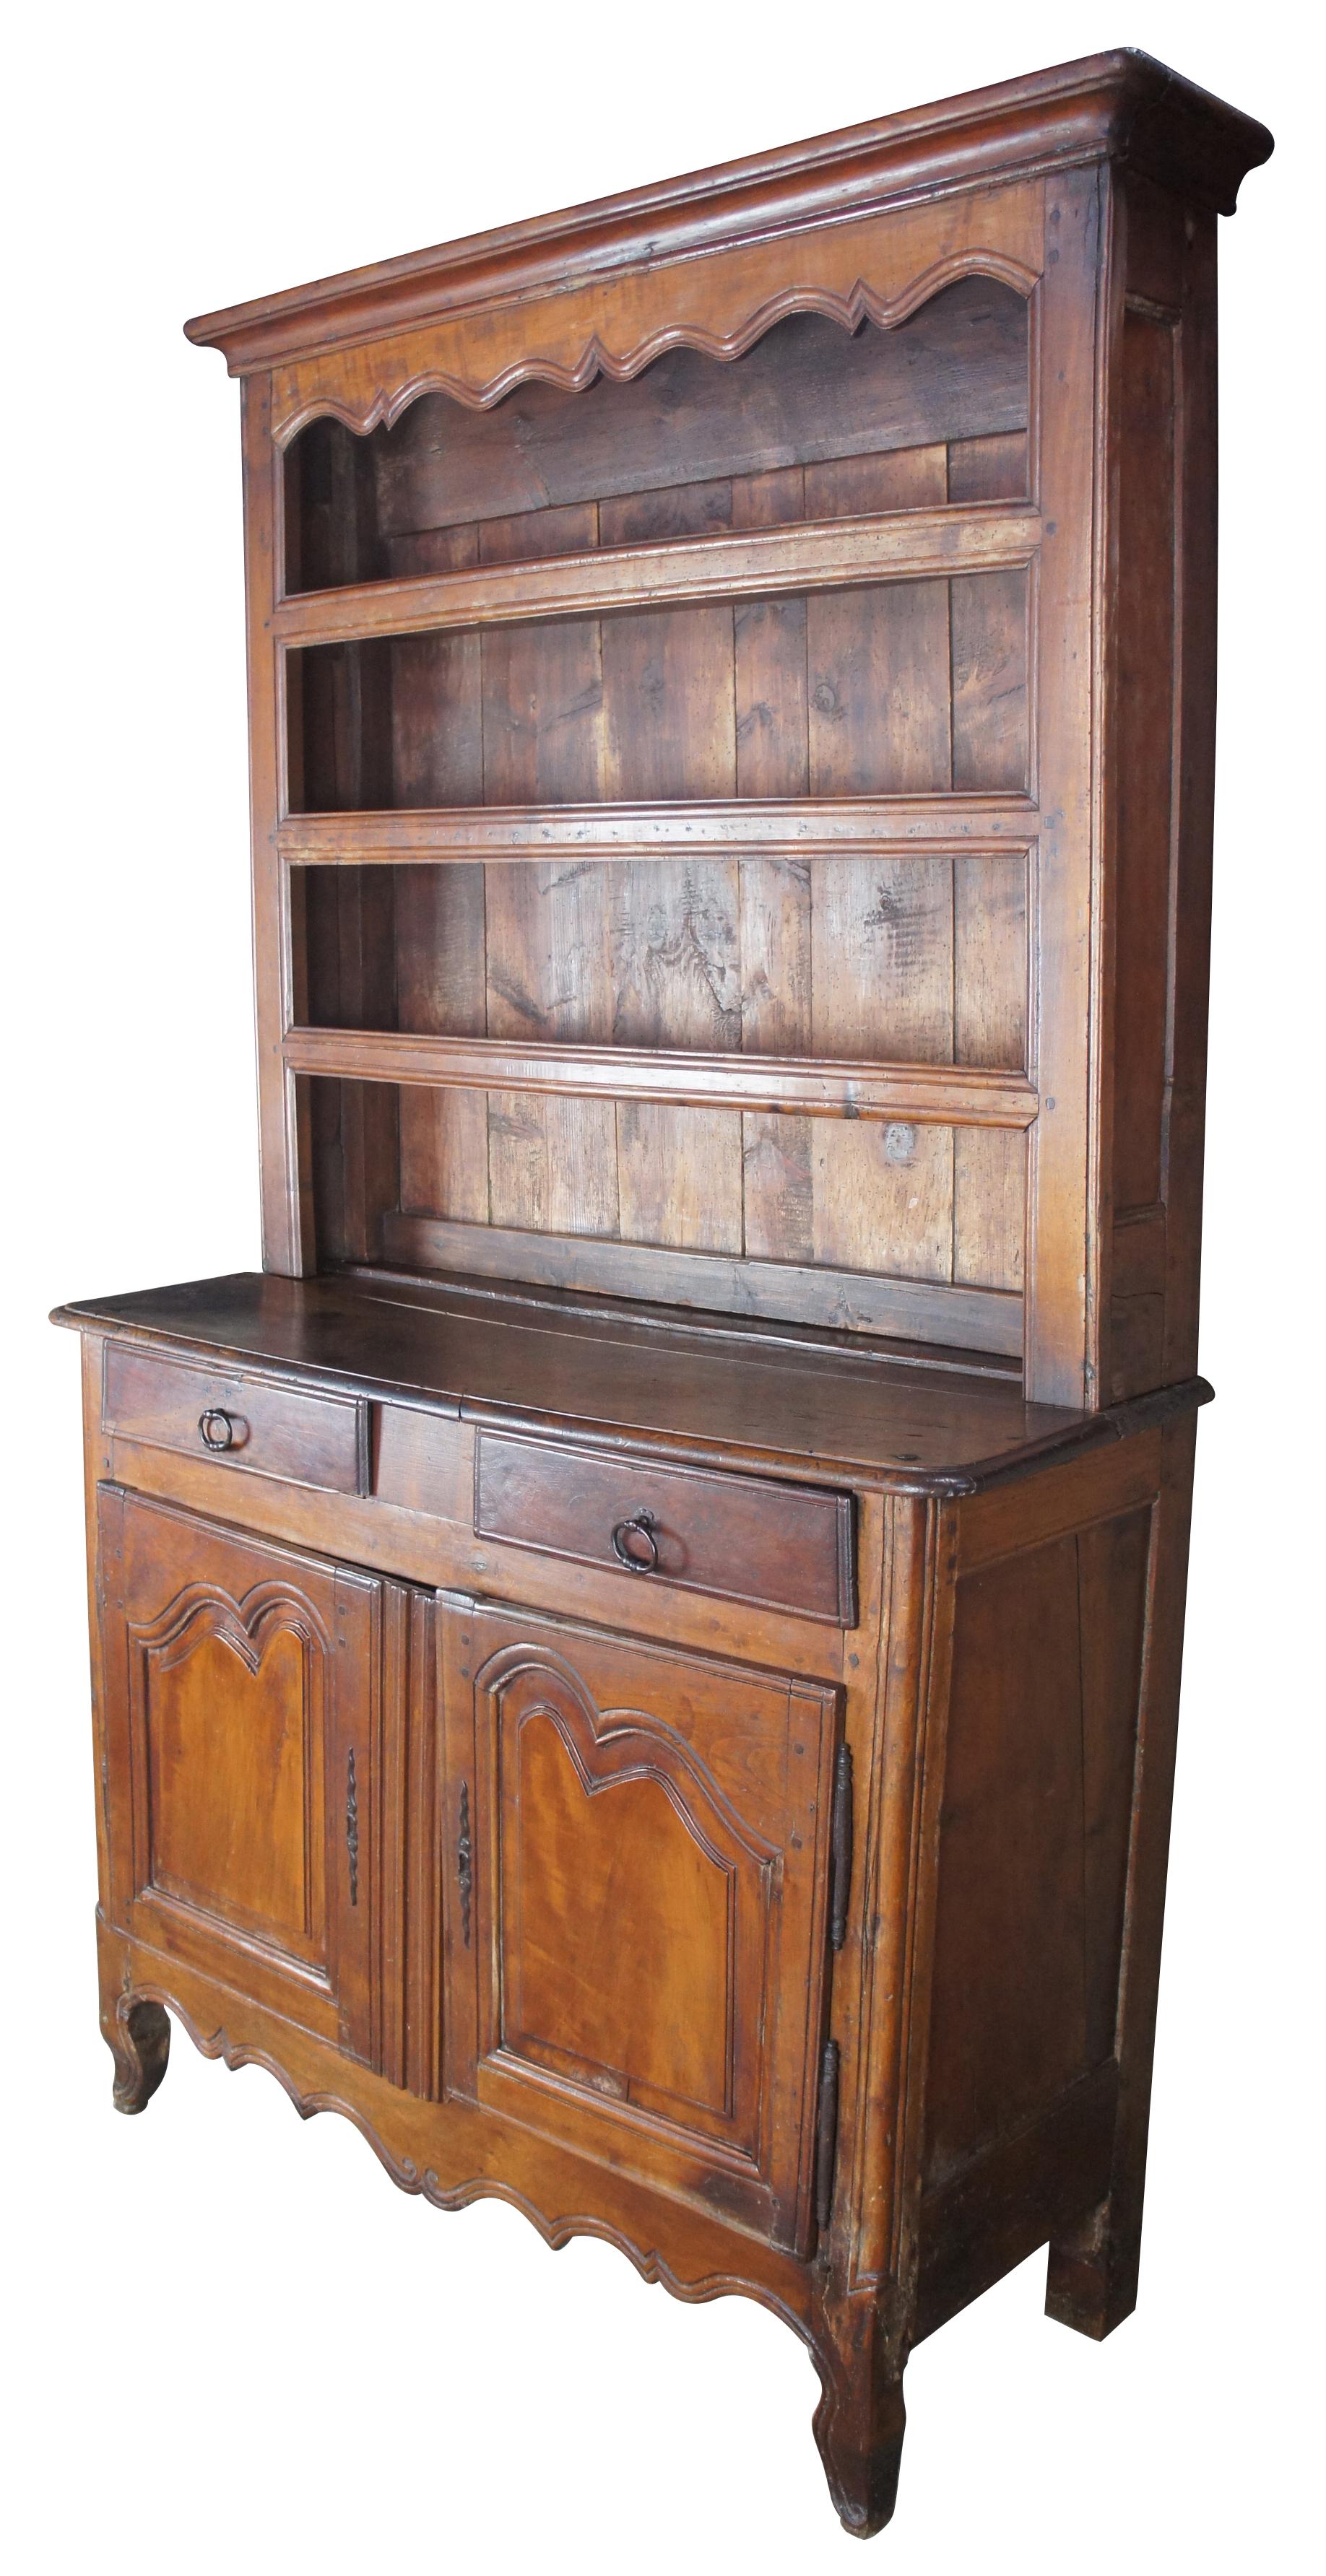 Antique 18th century French country rustic oak cupboard China hutch sideboard

Old world 18th century French cupboard; features four shelves with plate grooves, two hand dovetailed drawers and lower cabinet for storage. 

Sideboard surface